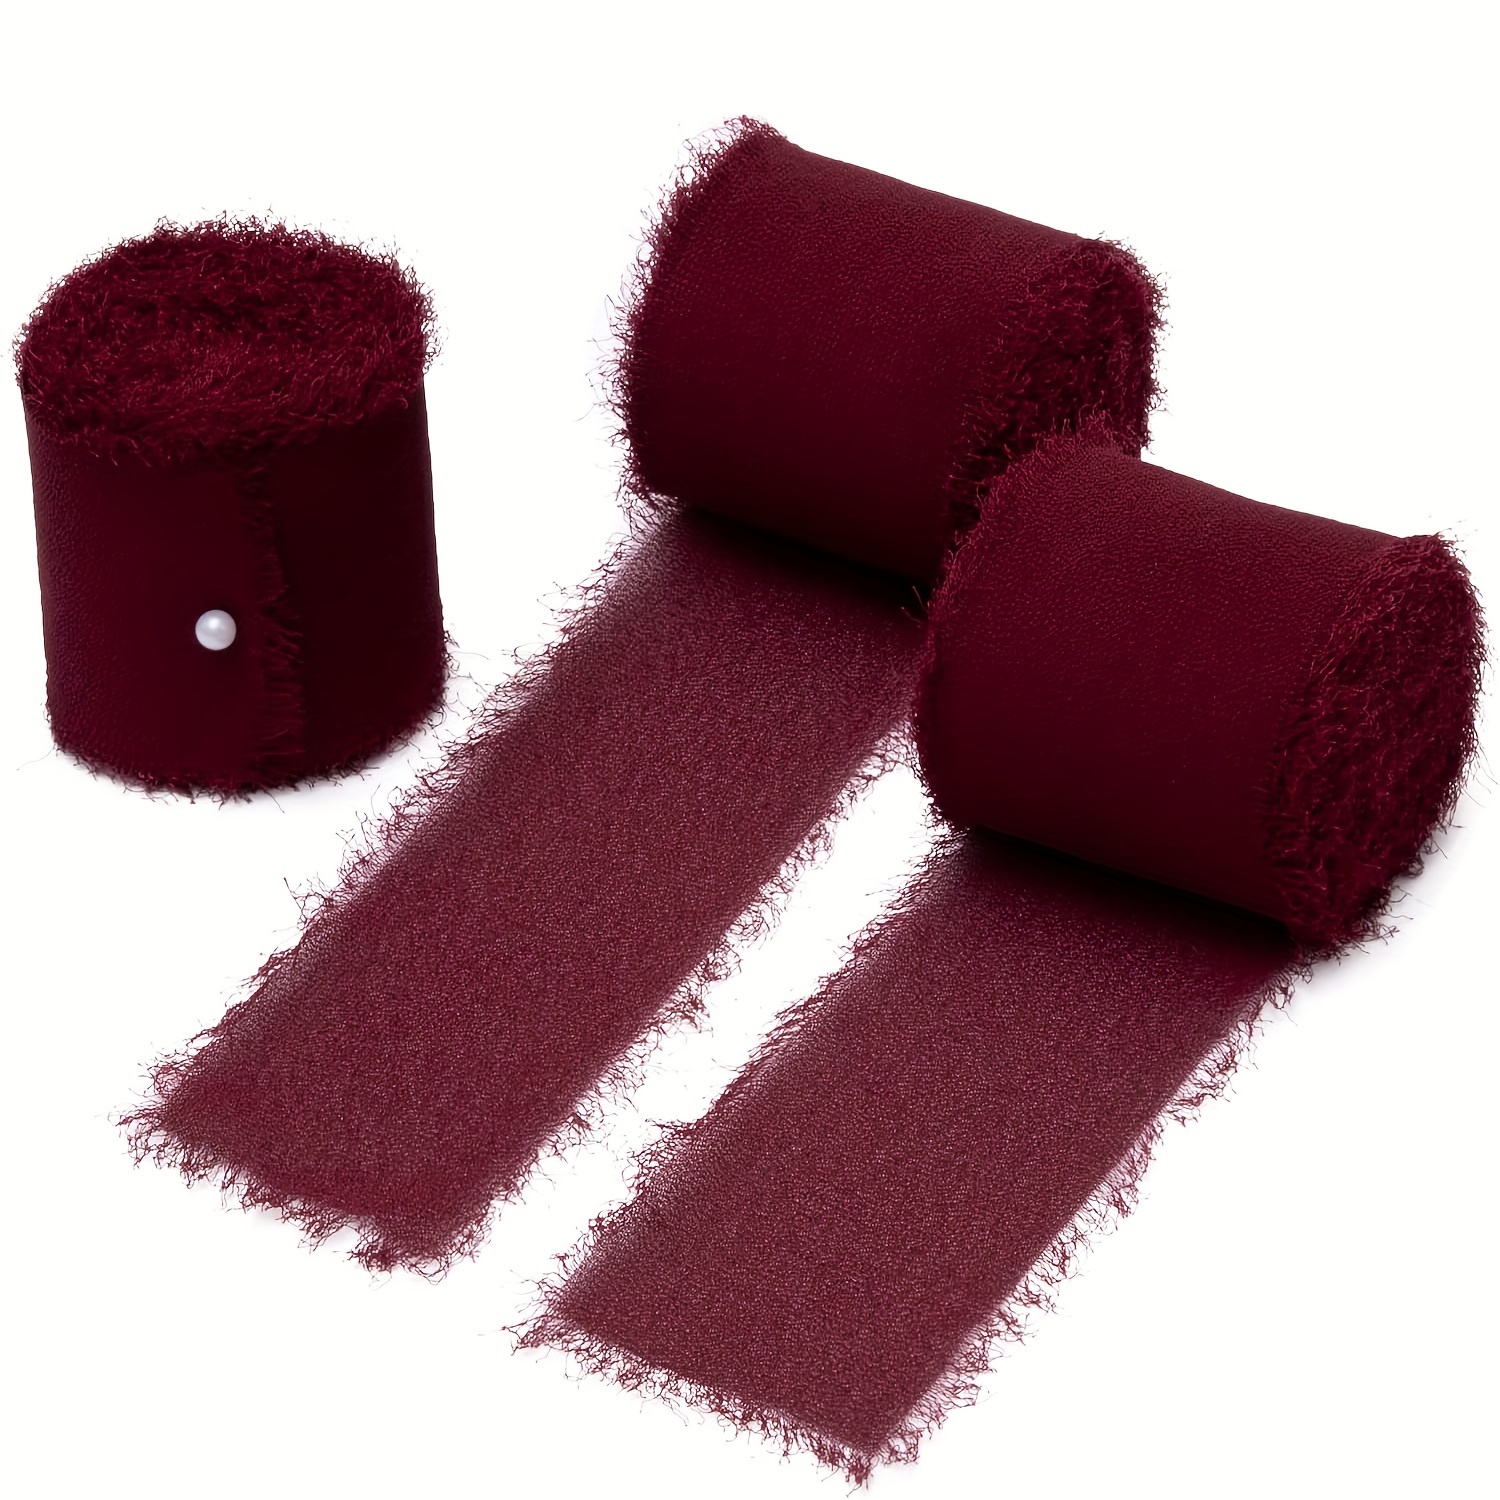 

Burgundy Chiffon Ribbon Roll Set – 3 Rolls, 15 Yards Total – Elastic Fabric Gift Wrapping Ribbons For Wedding Decorations, Party Supplies, And Crafting